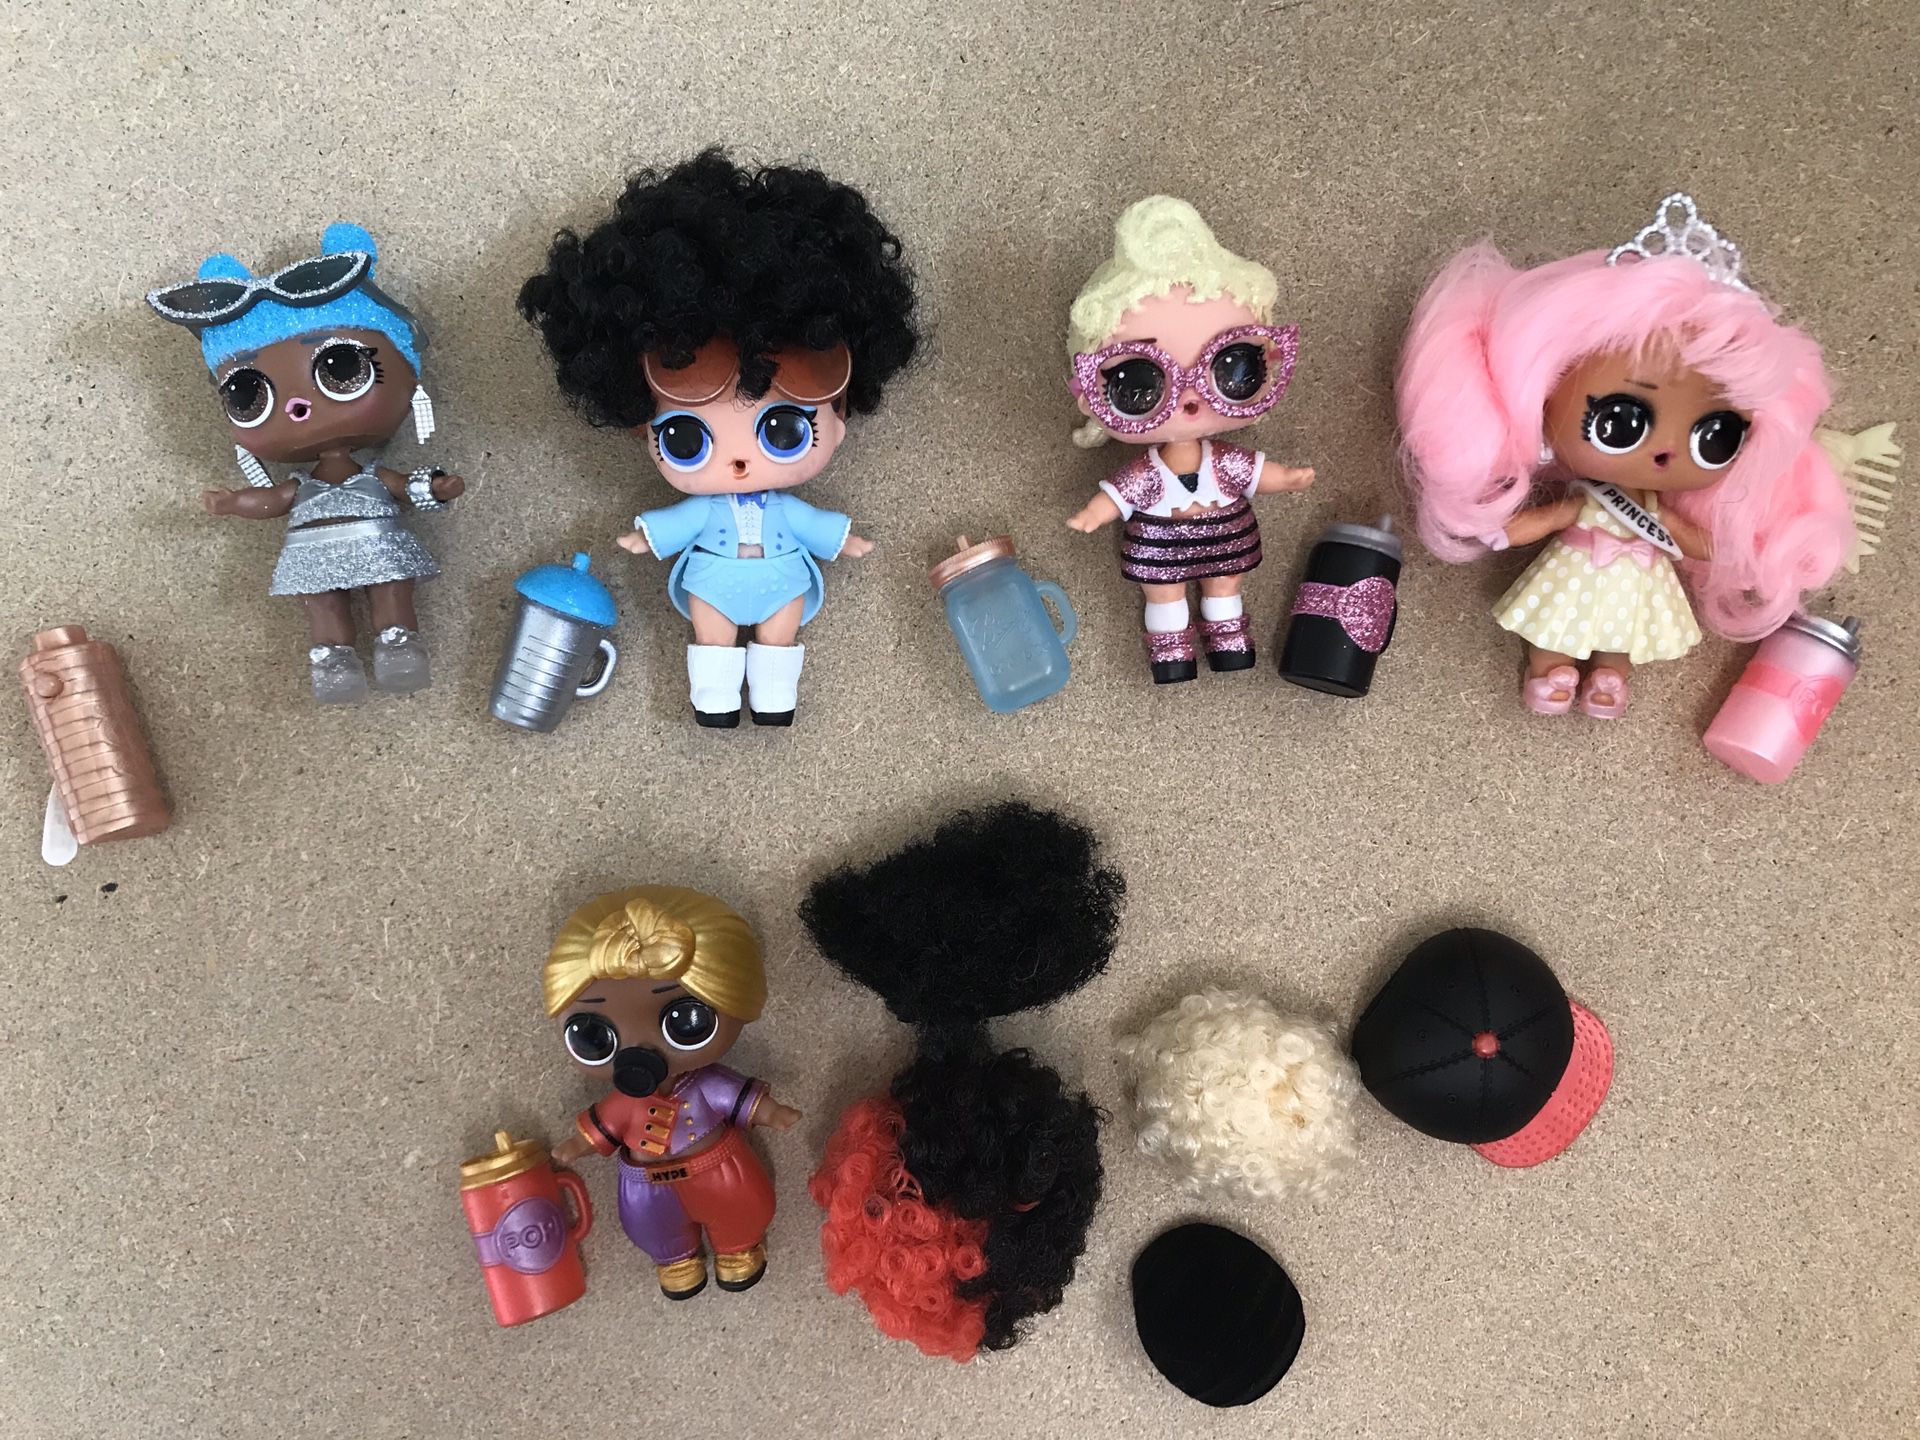 LOL surprise dolls new, 5 for $30